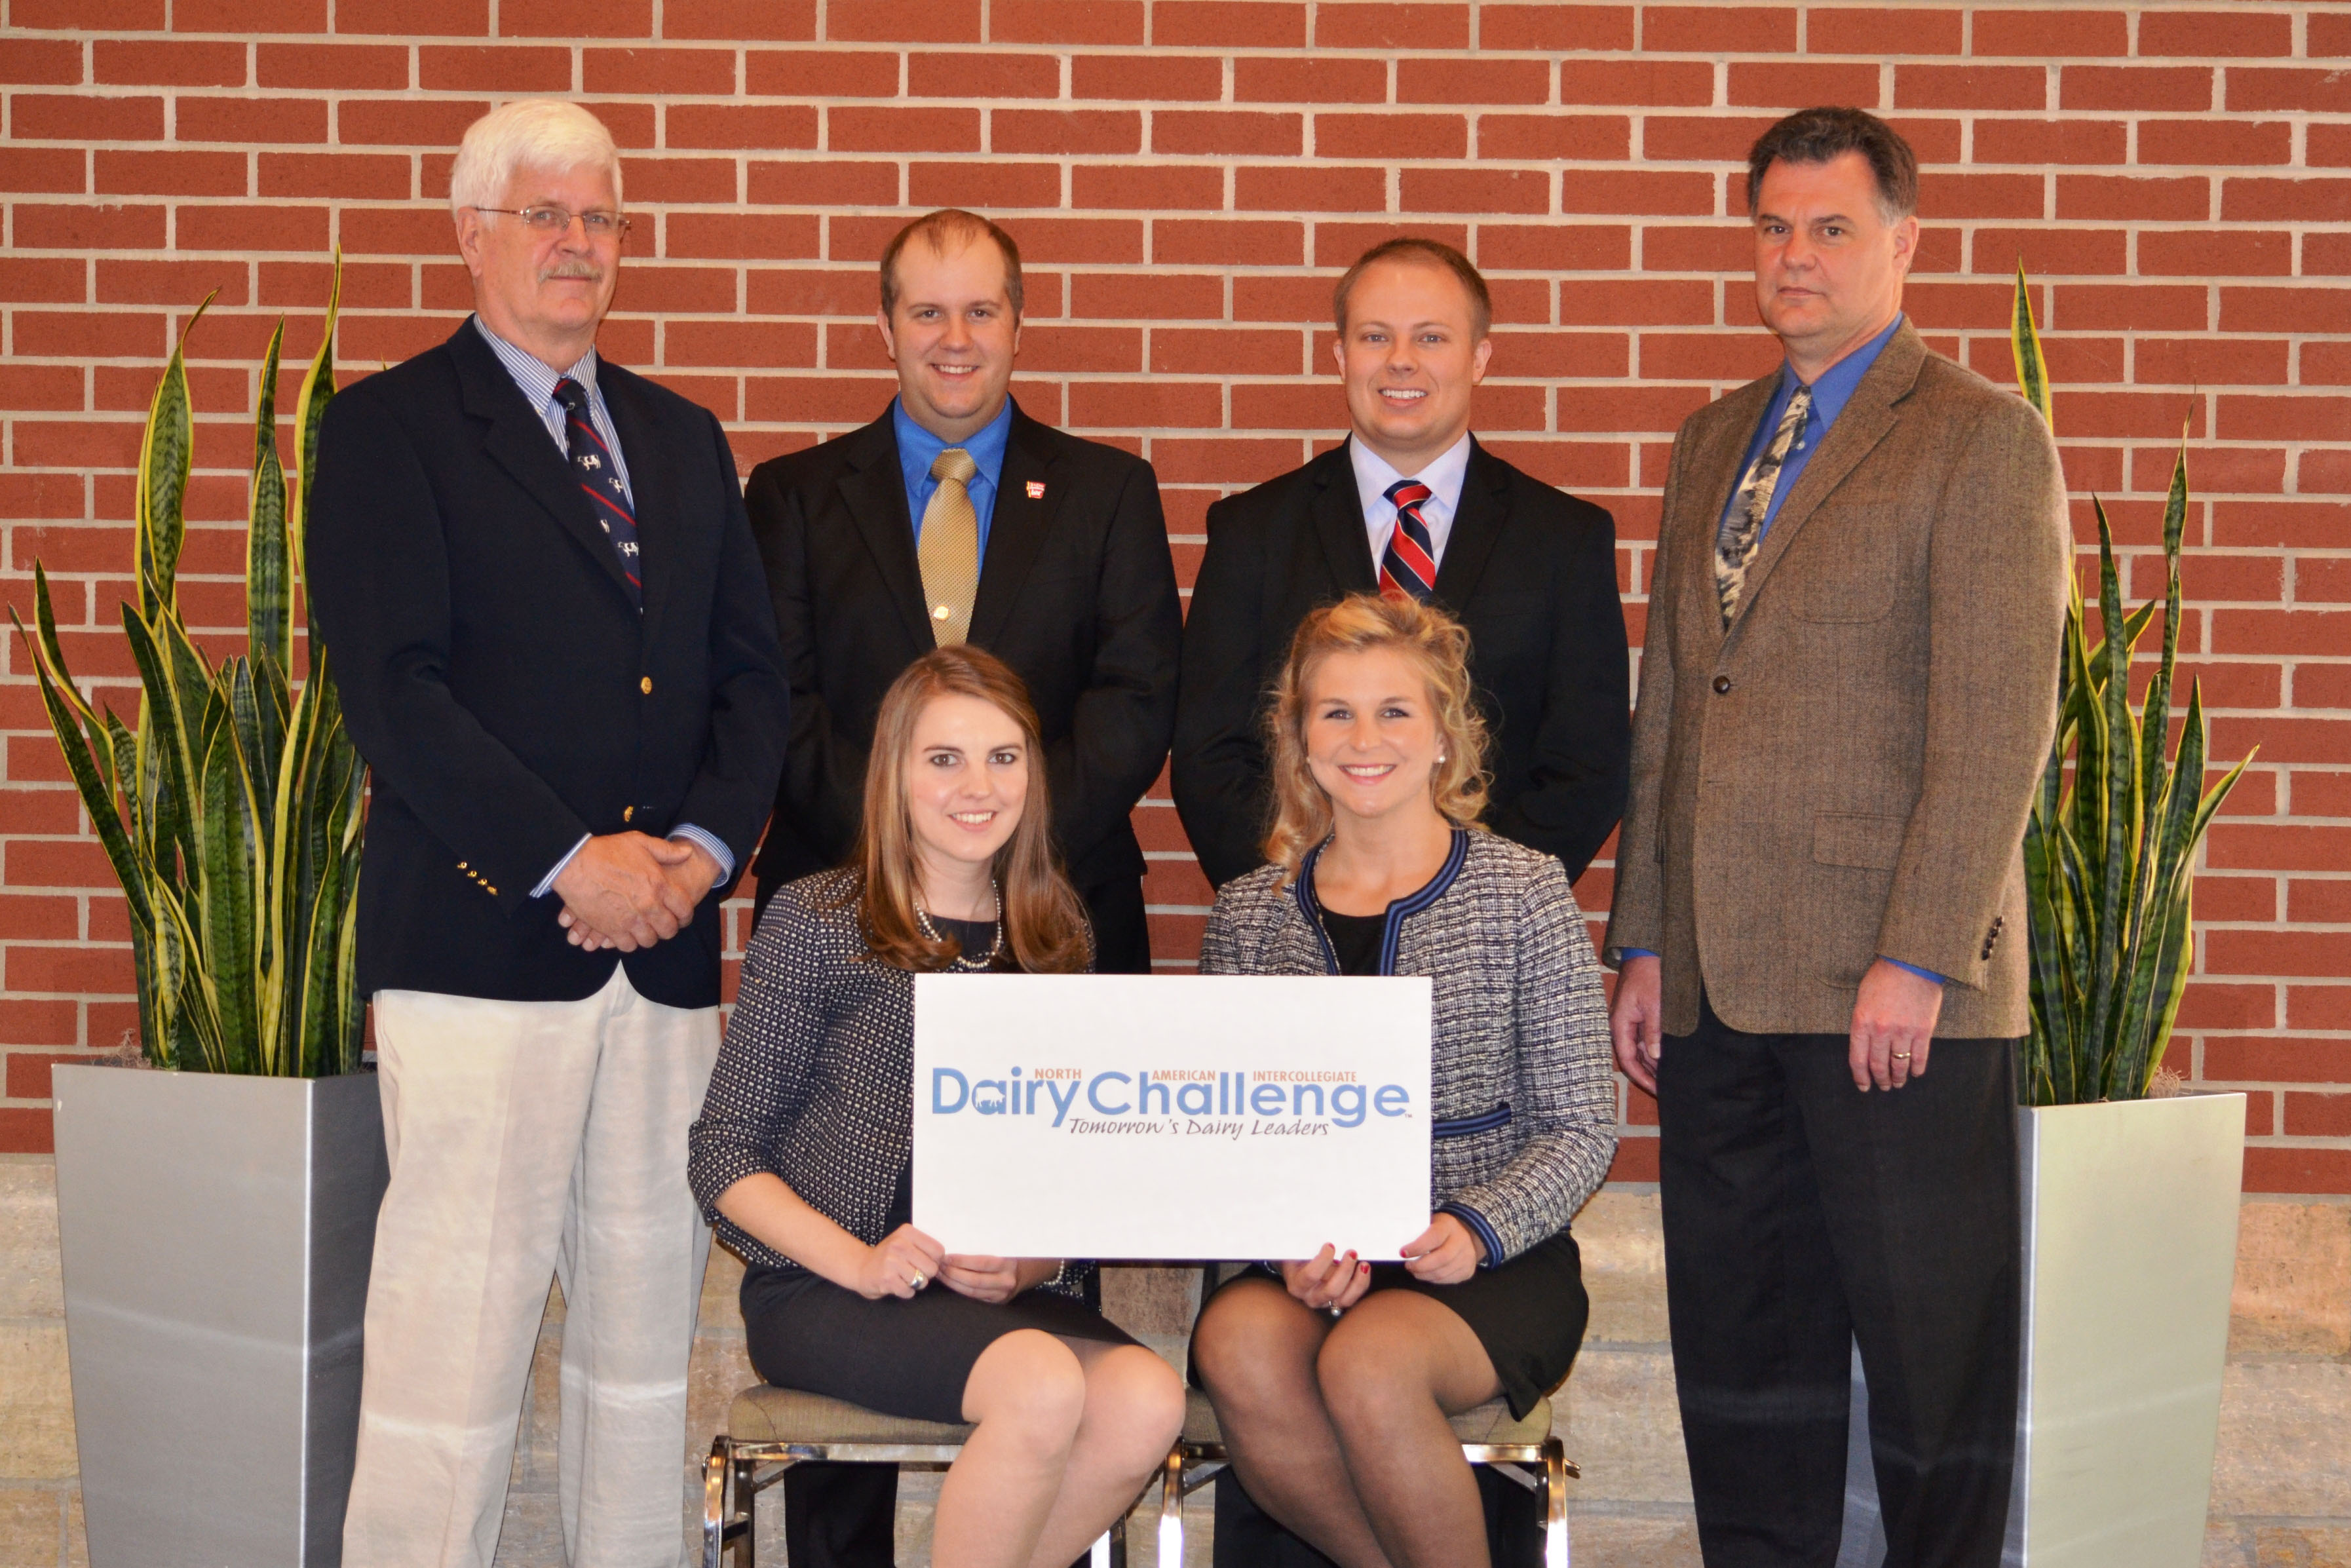 Dairy science students from Virginia Tech who recently competed in the North American Intercollegiate Dairy Challenge.